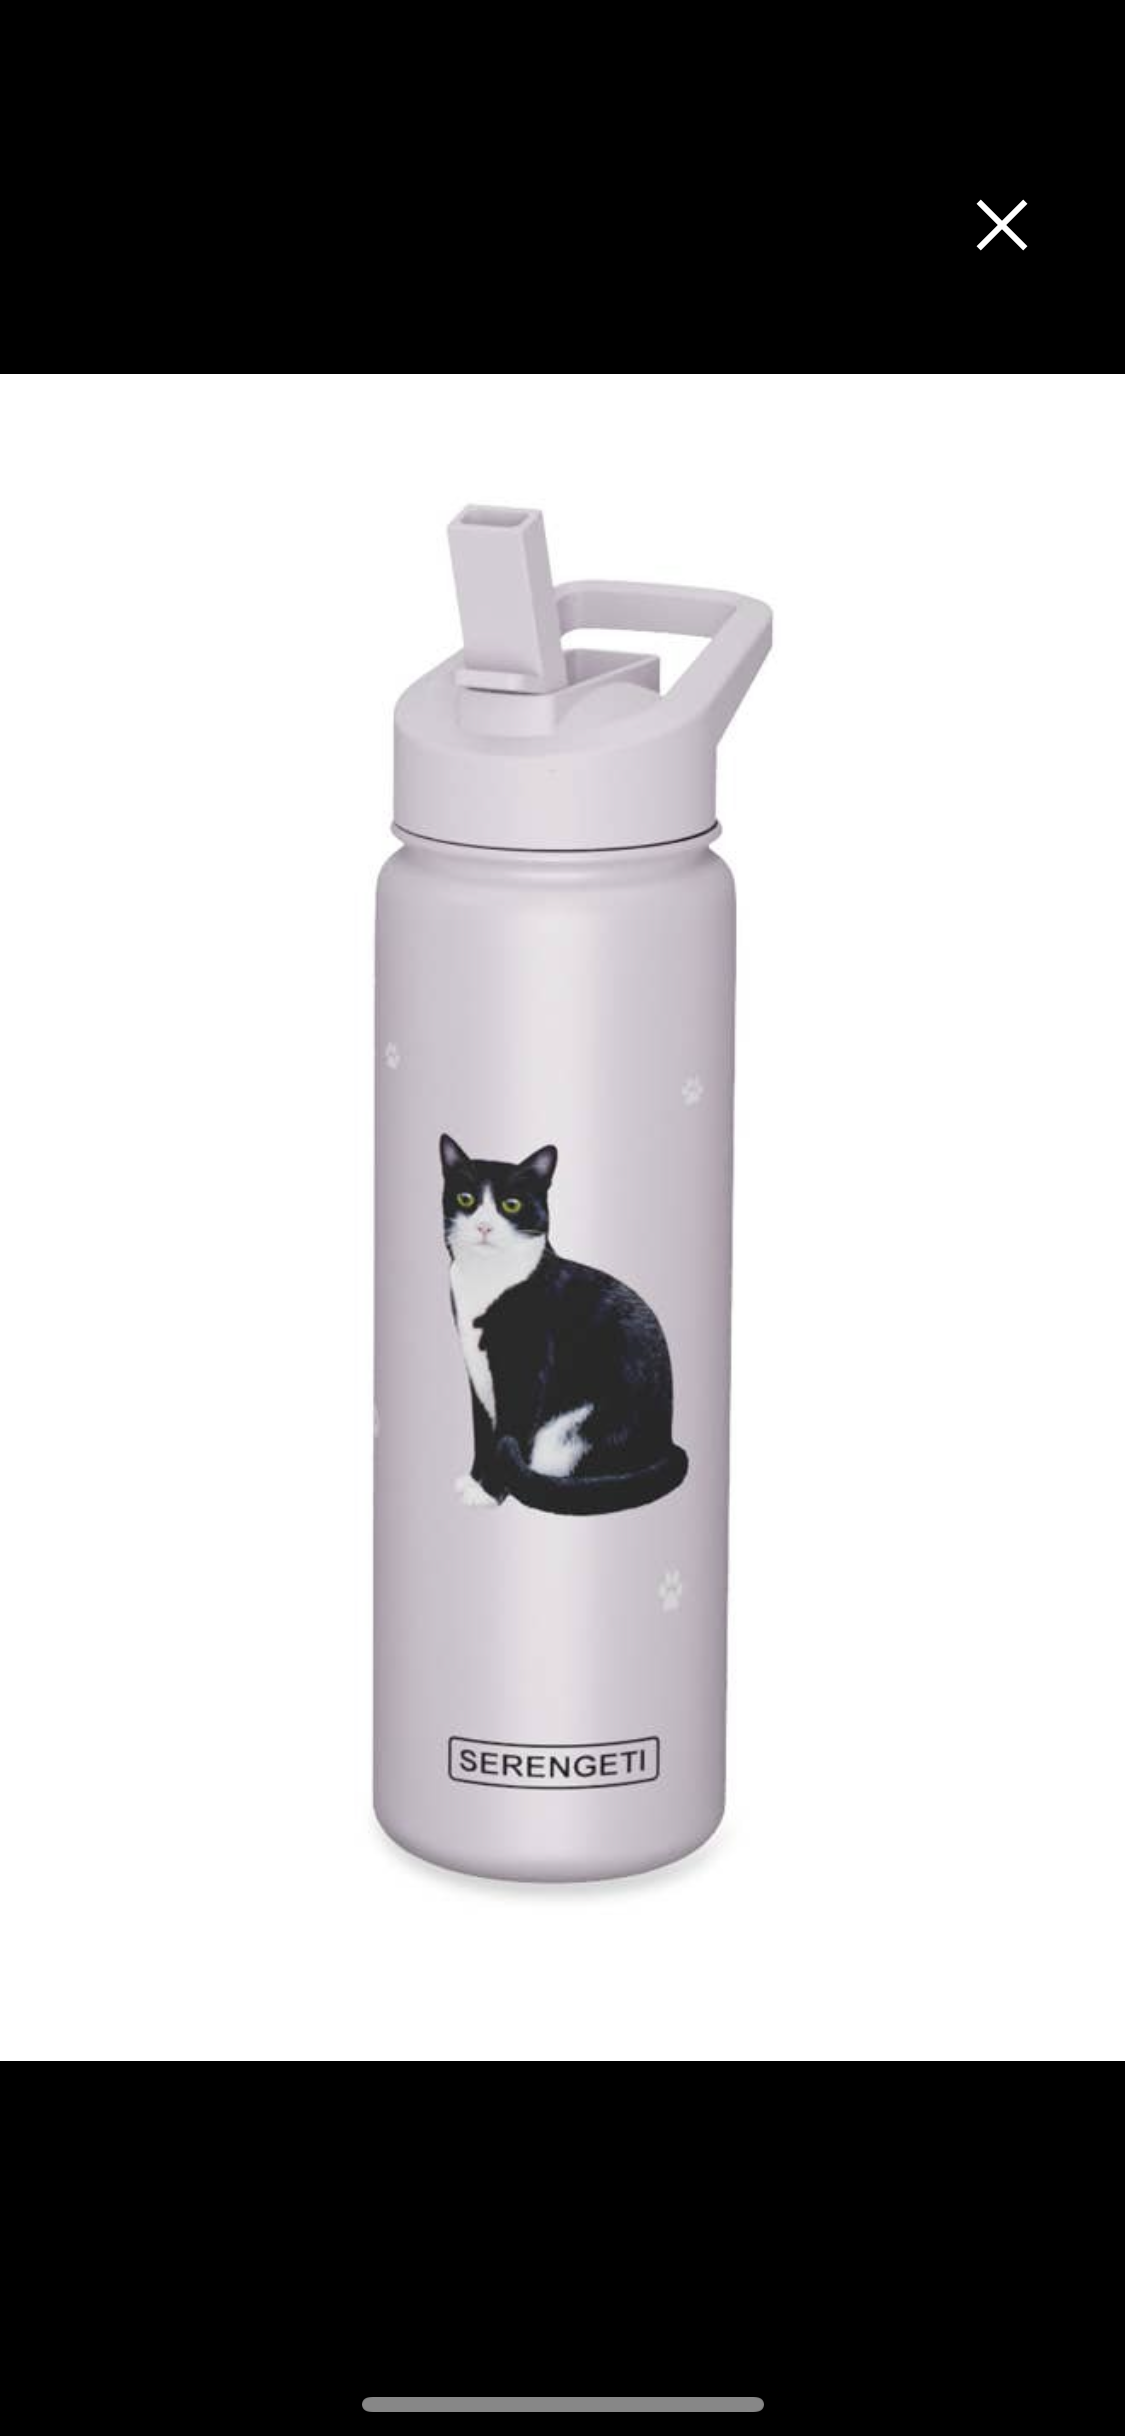 Insulated Water Bottle - Cat